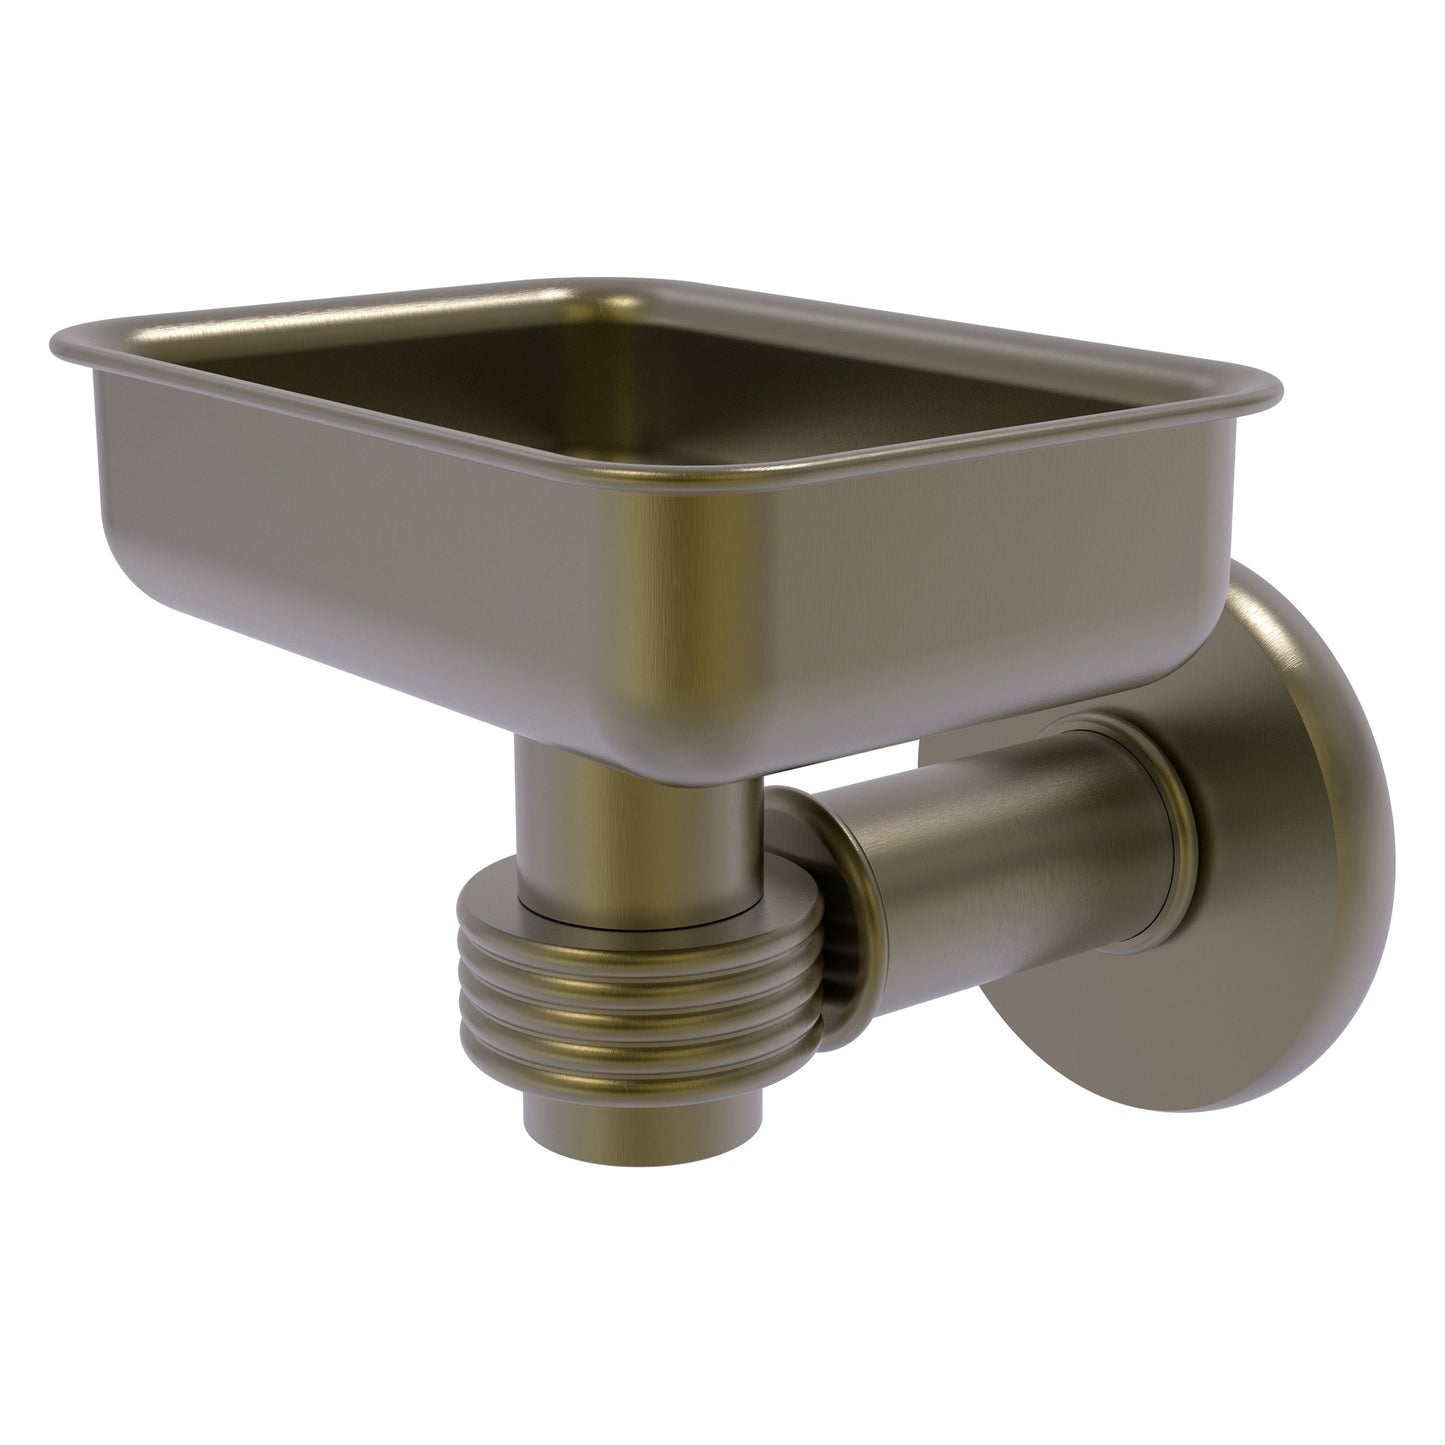 Allied Brass Continental 4.5" x 3.5" Antique Brass Solid Brass Wall-Mounted Soap Dish Holder with Grooved Accents